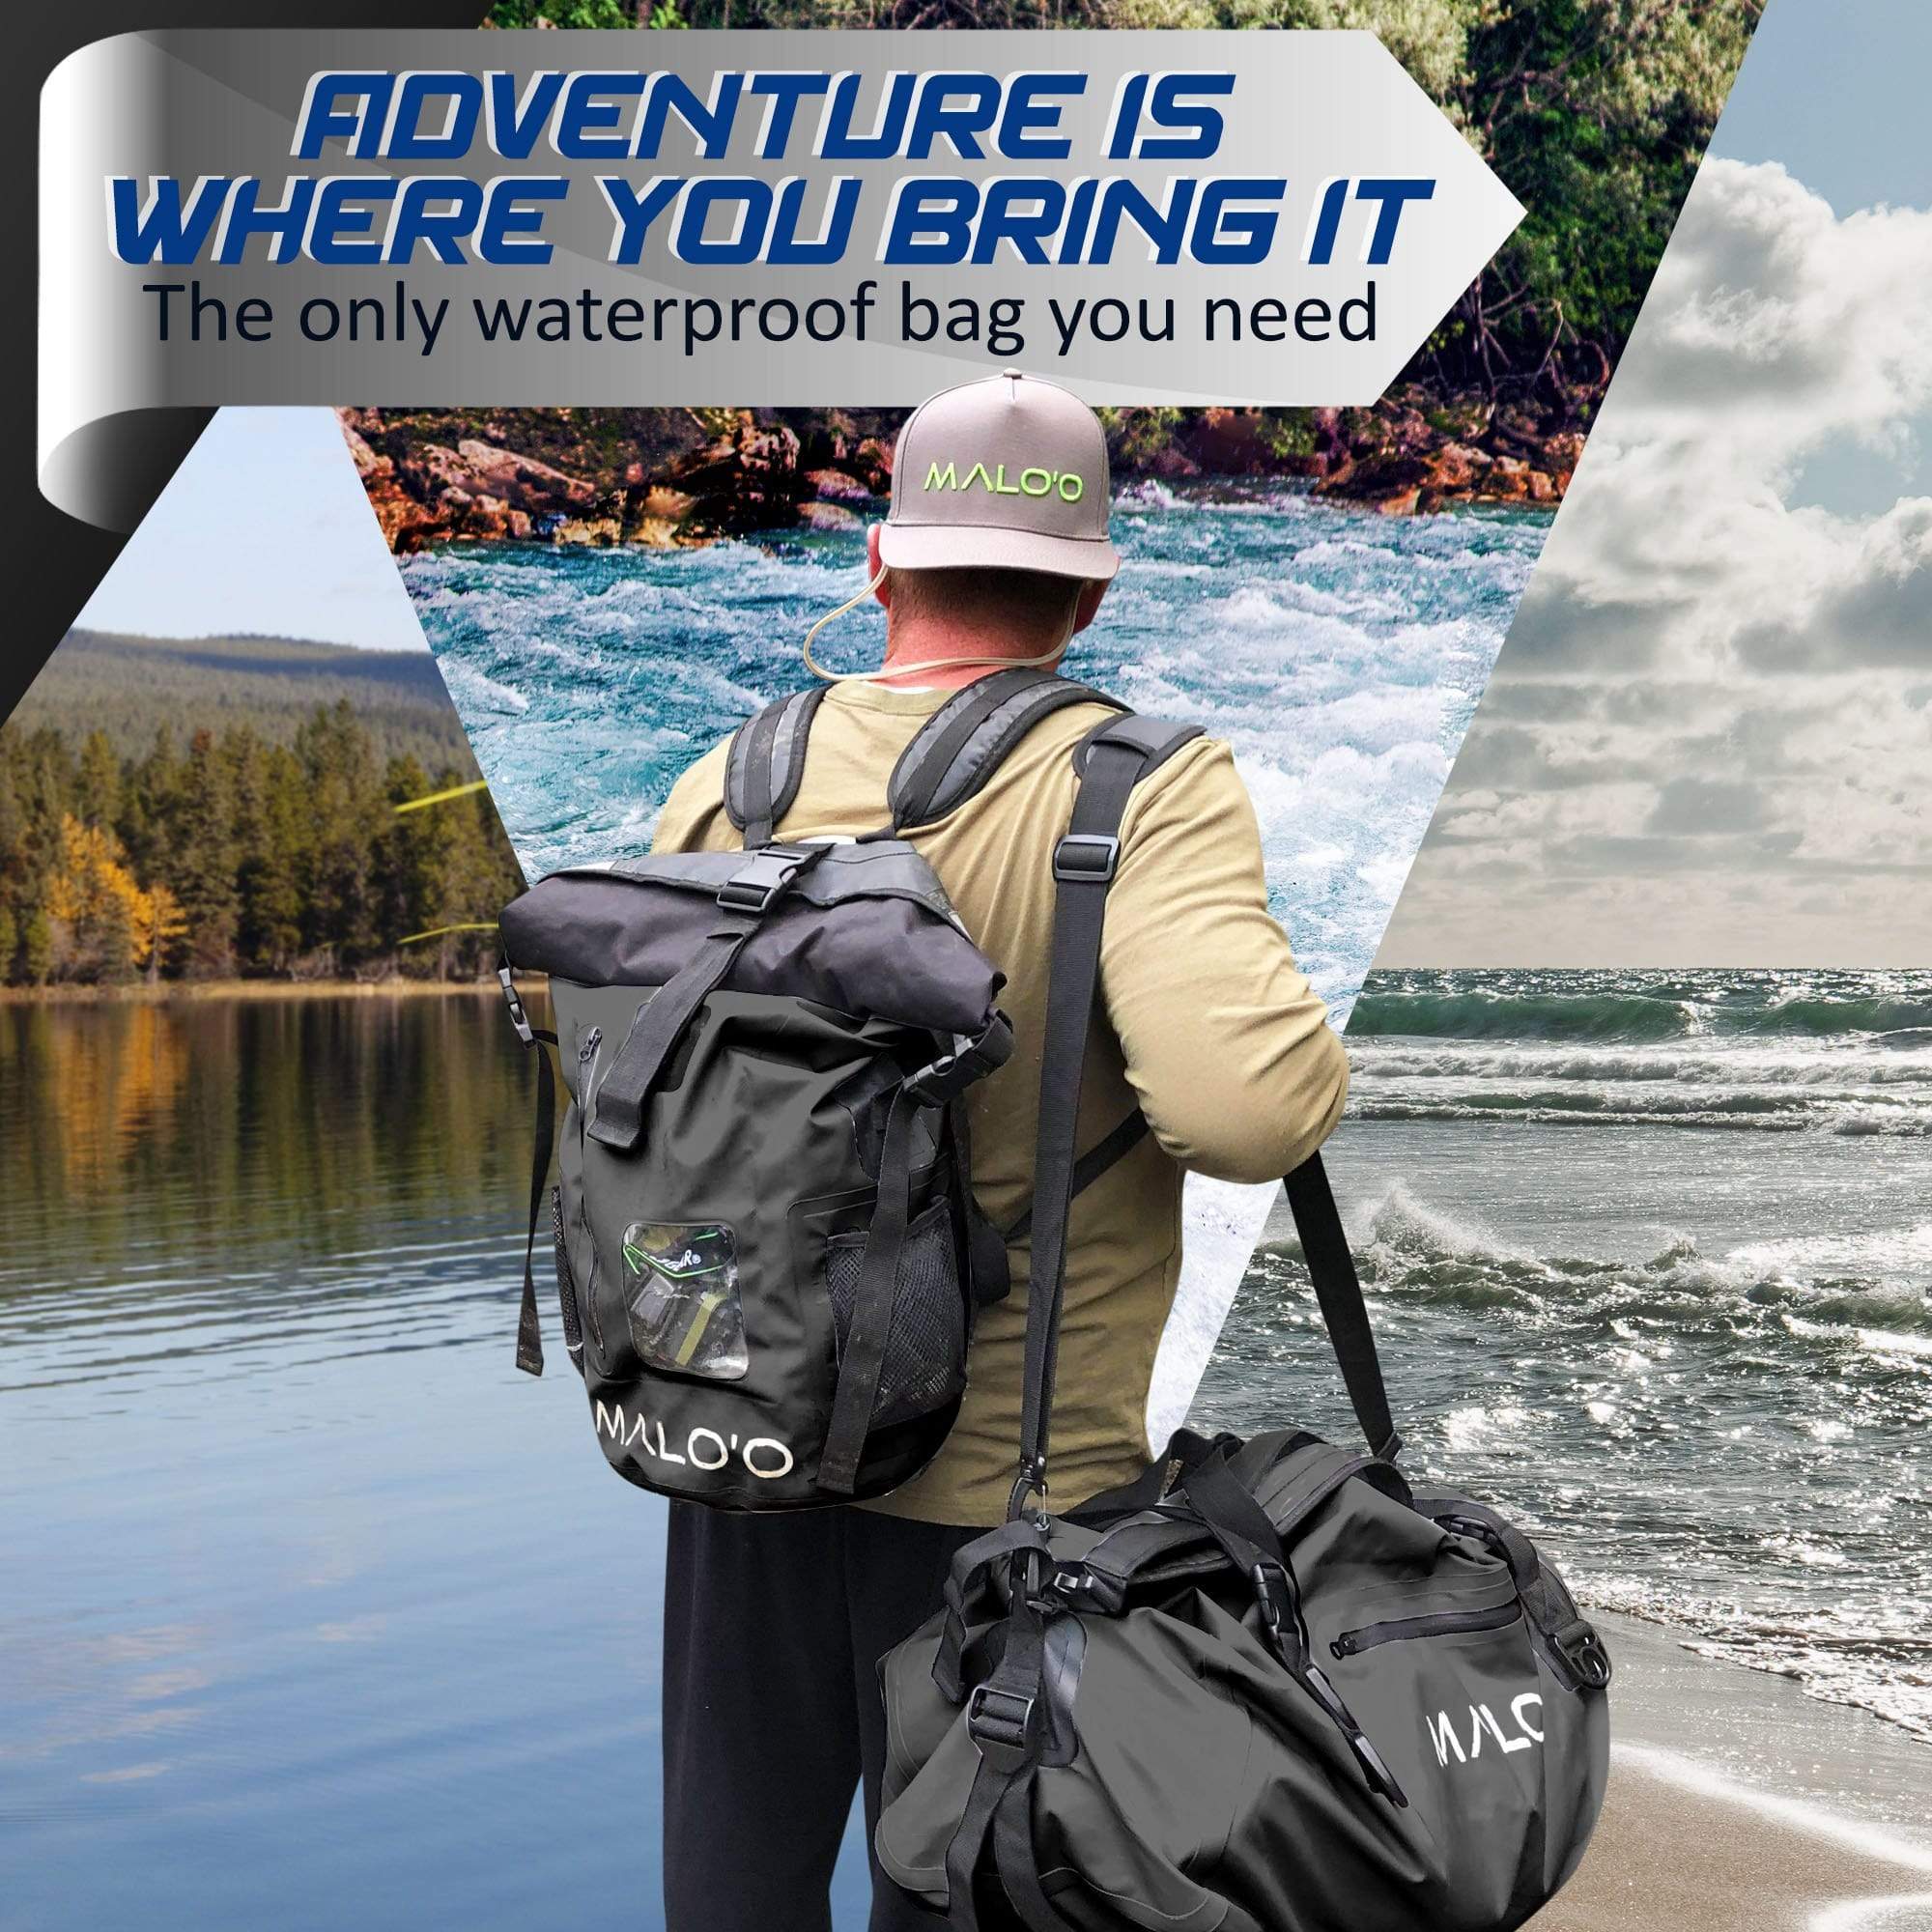 The Best Waterproof Travel Bags For Beach And Lake Trips